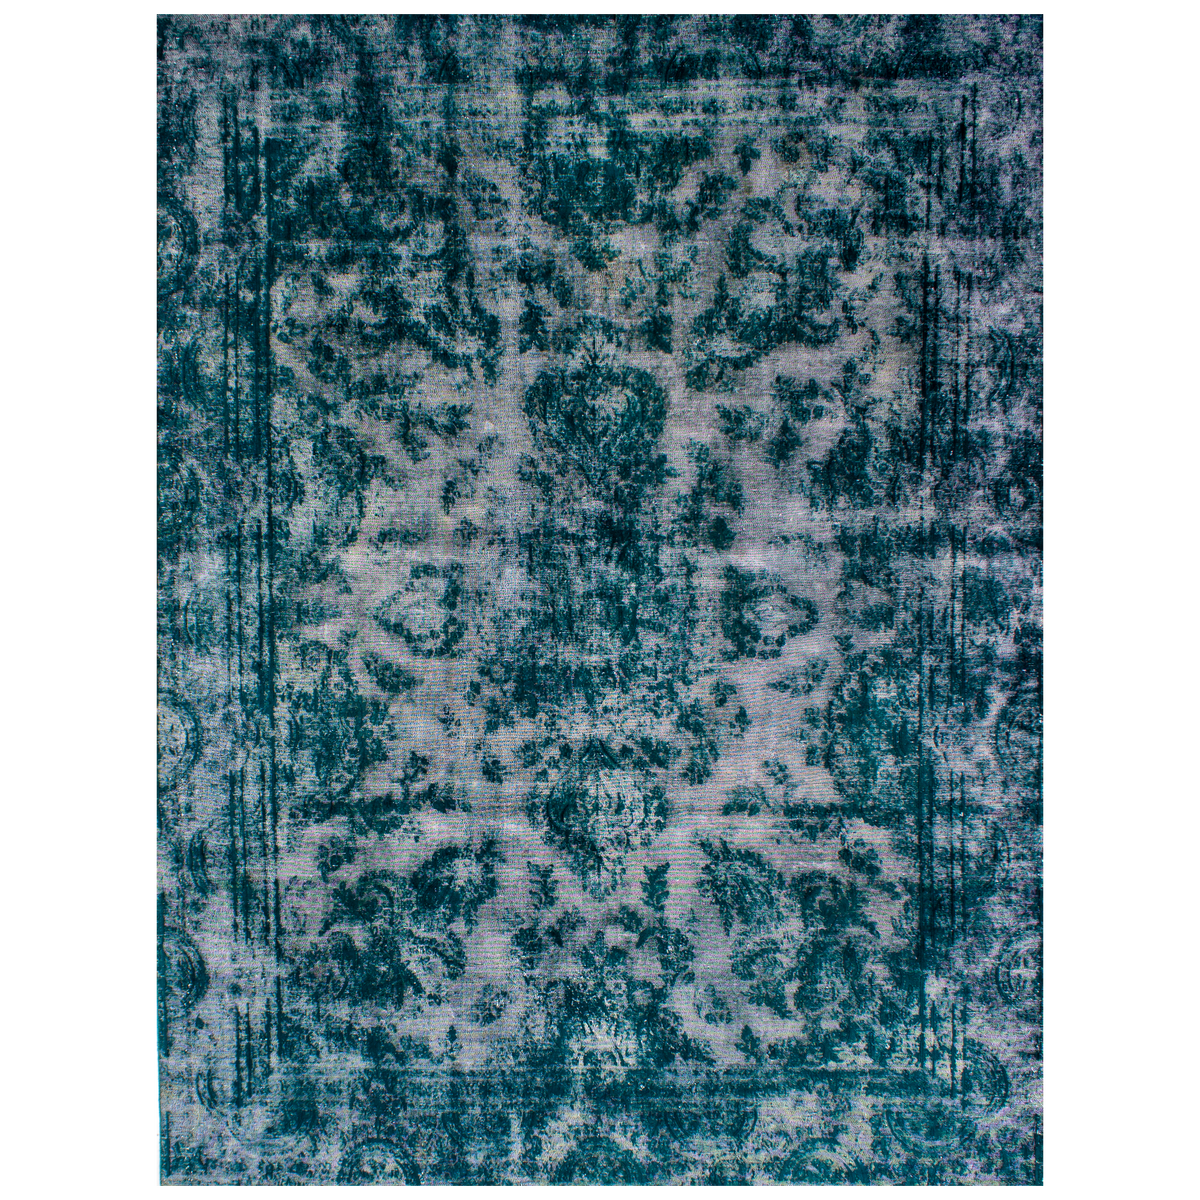 About the Second Life Collection:Traditional Antique Persian and Turkish rugs are stripped of their original colours, are over-dyed, and given a new life in a sophisticated modern 